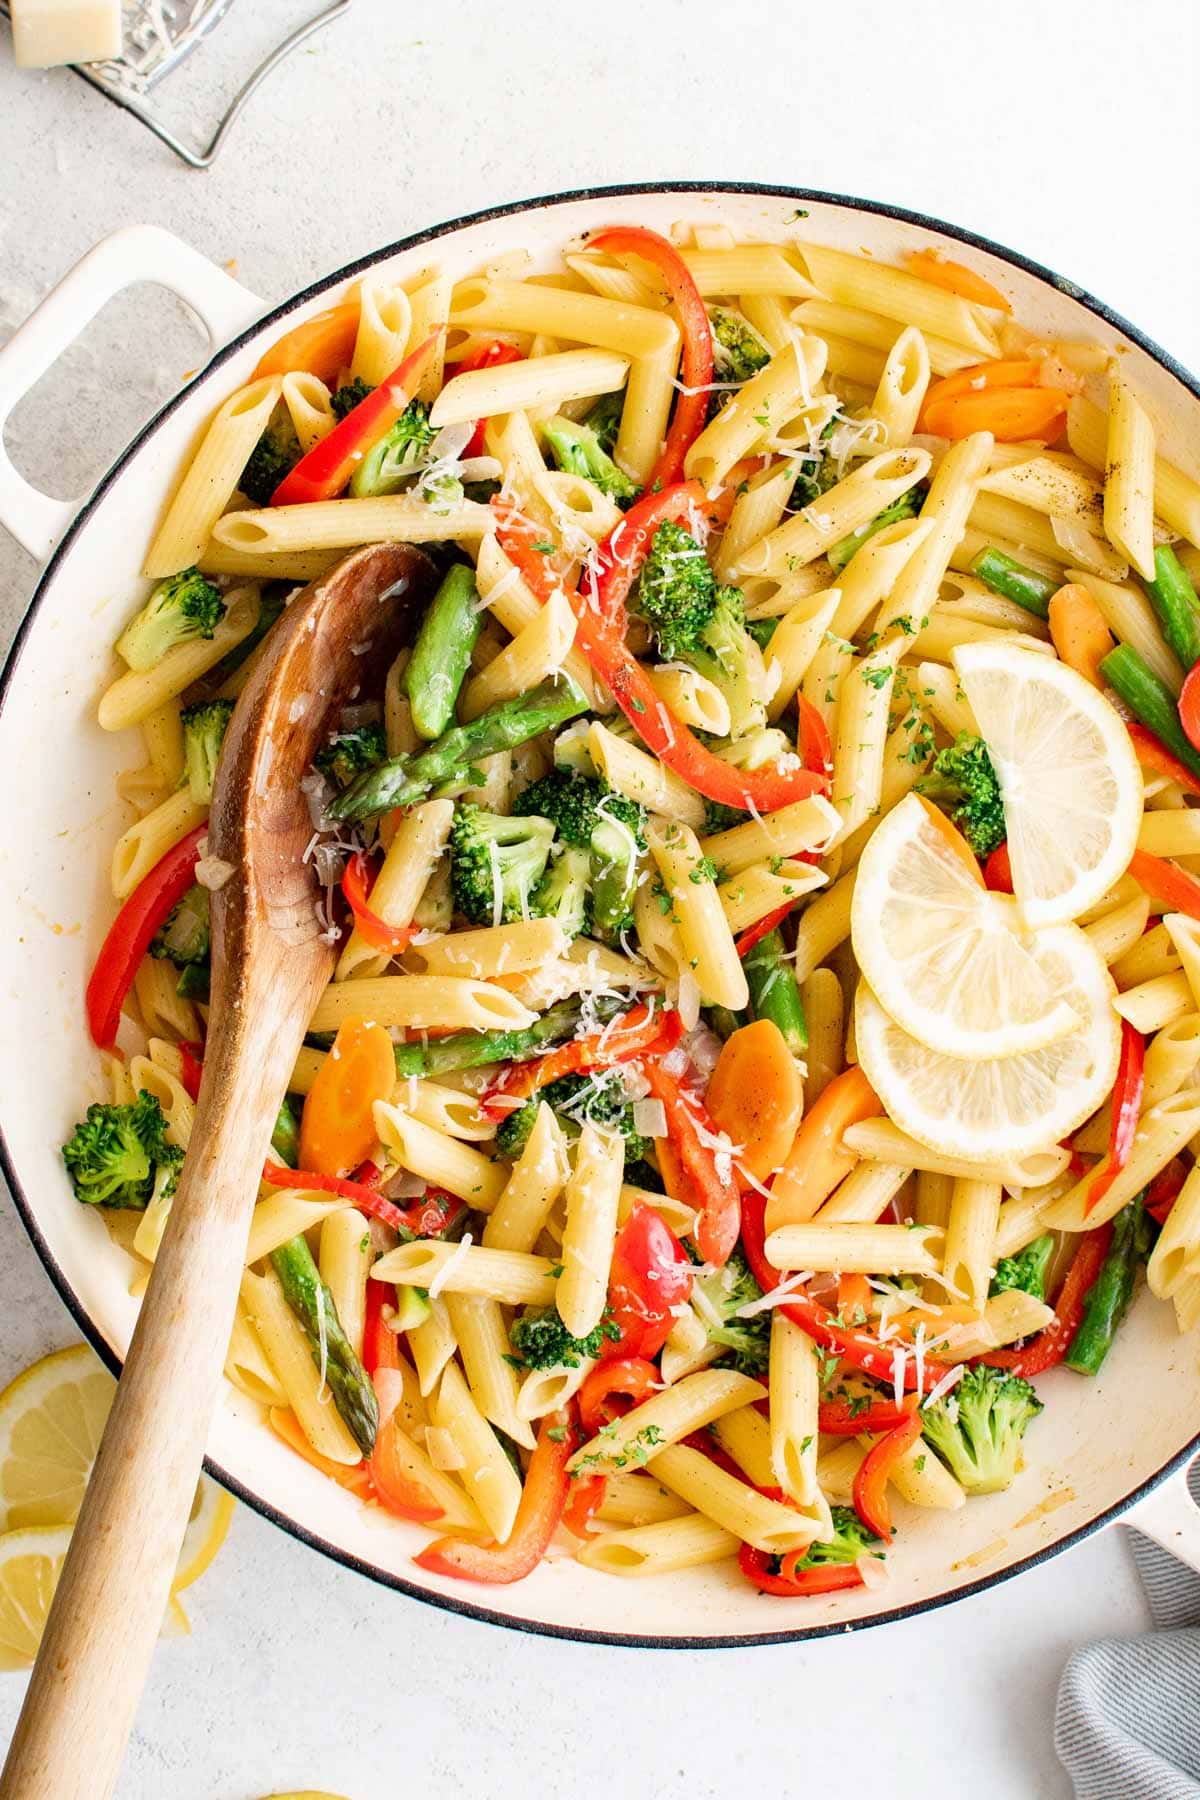 Penne pasta and vegetables in a large skillet with lemon slices and a wooden spoon.